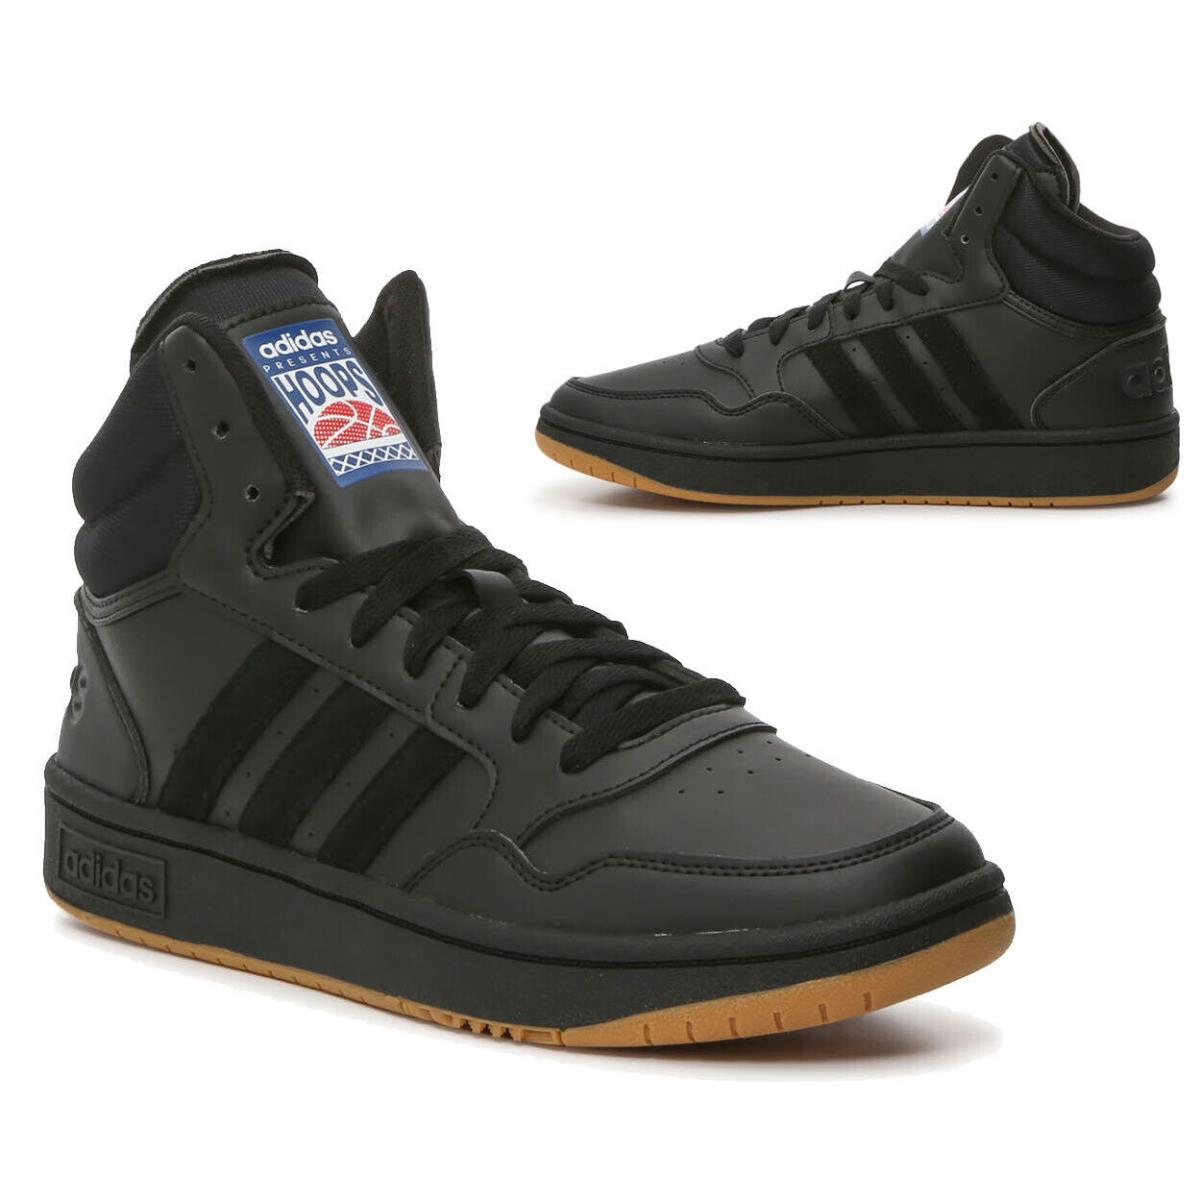 Adidas Hoops hi Top Athletic Sneaker Casual Shoes Mens Black Gum All Sizes